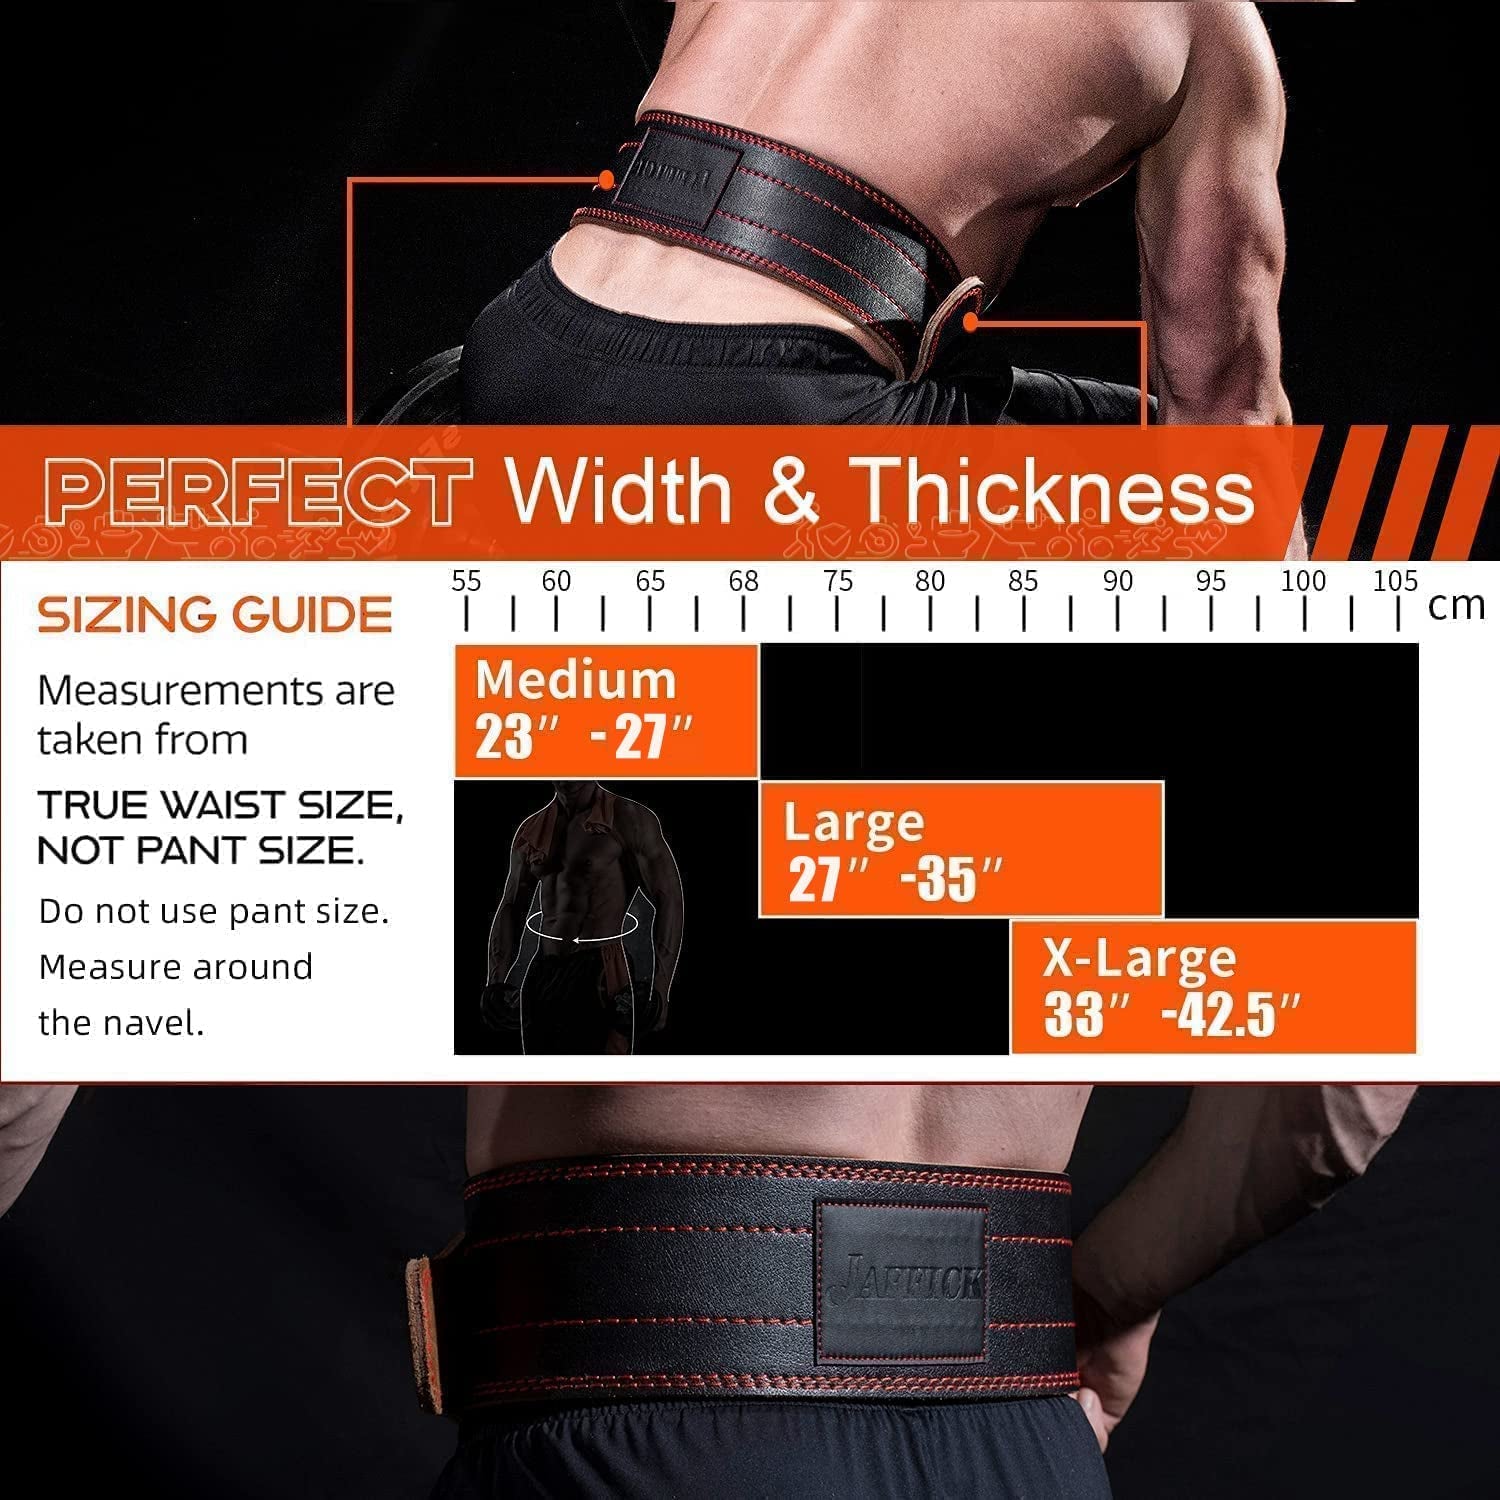 Genuine Leather Weight Lifting Belt 